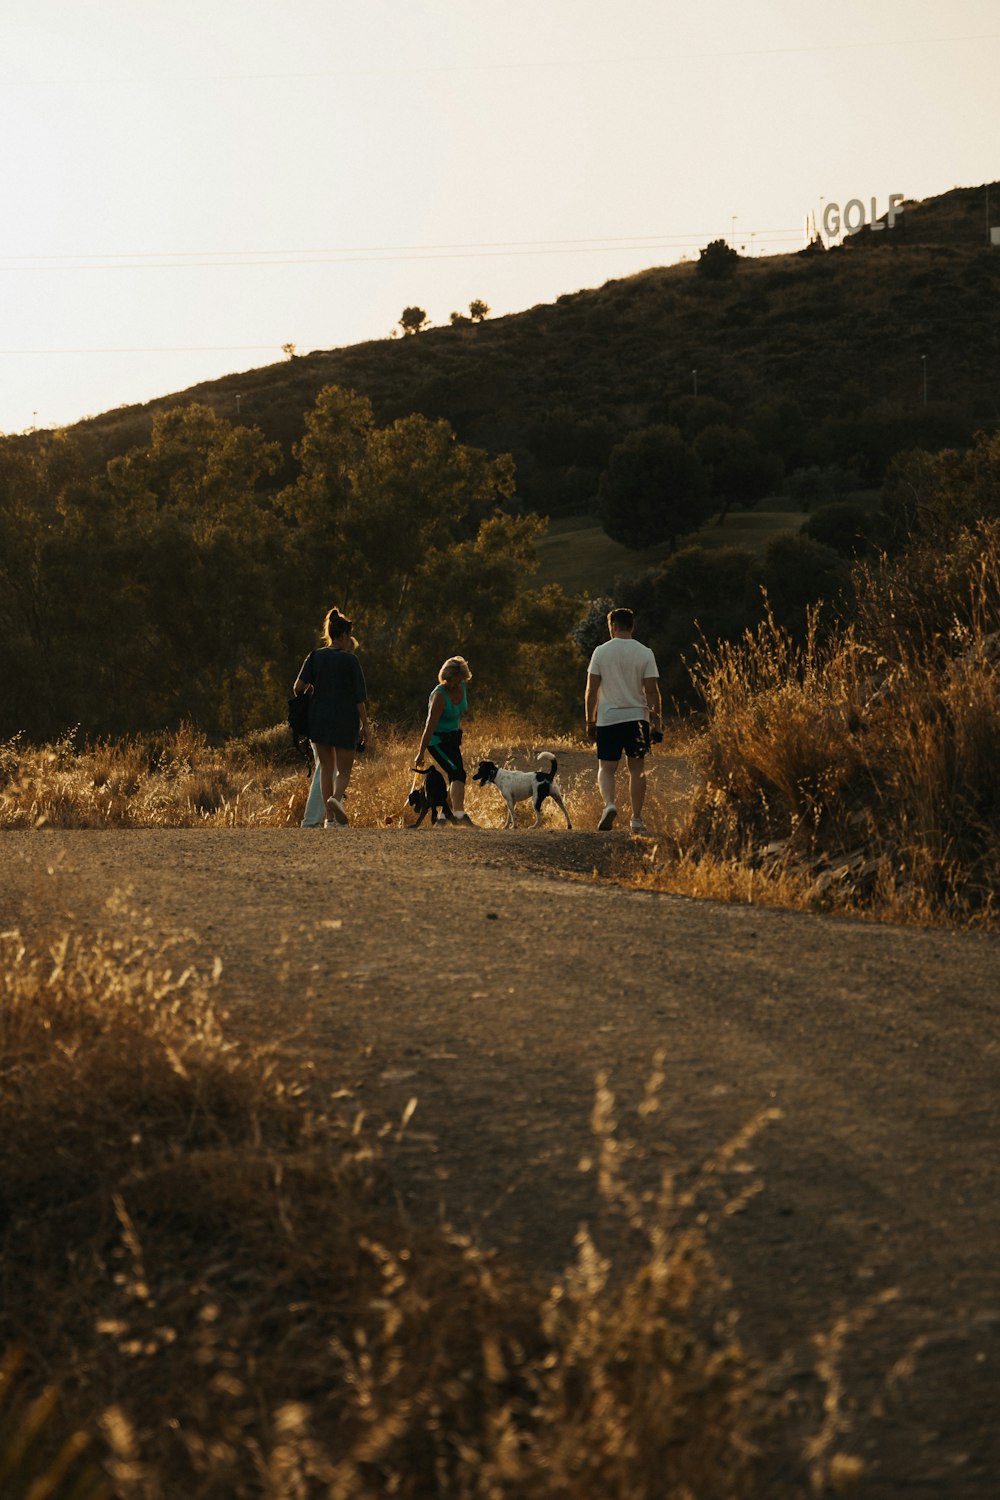 a group of people walking dogs on a dirt road